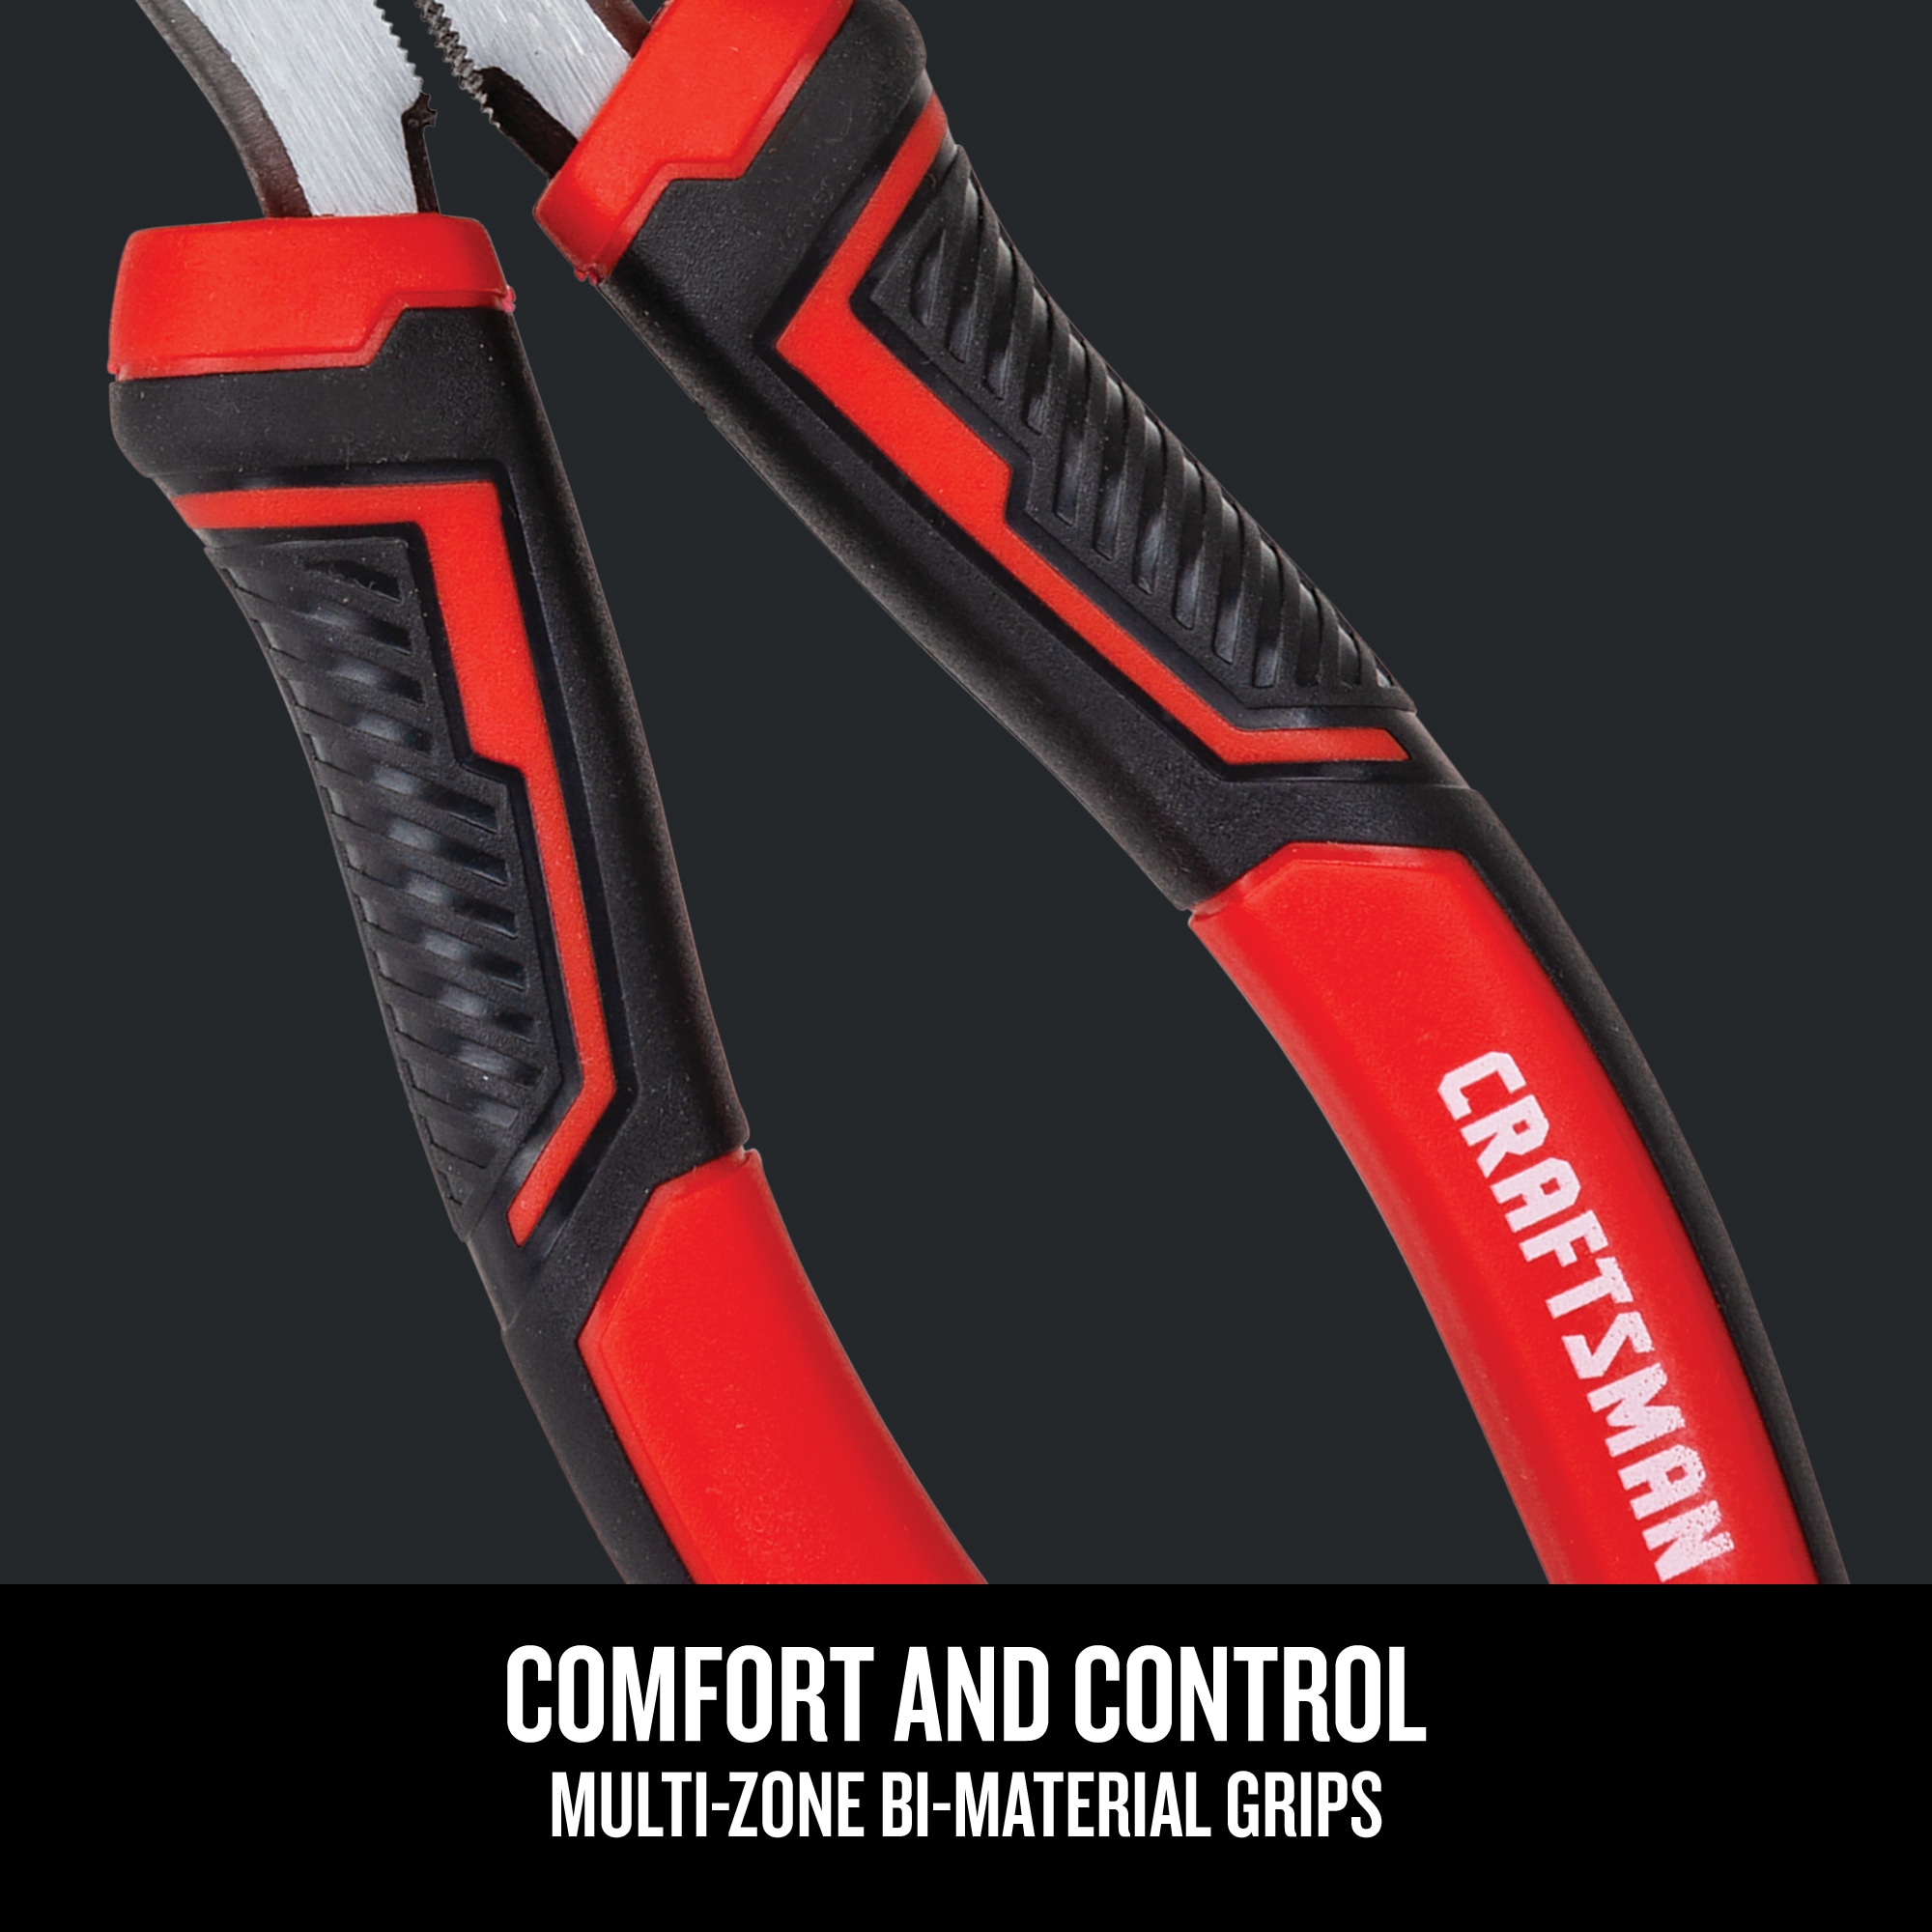 Craftsman 25-Pack Assorted Pliers Plier Set in Red | CMHT82625